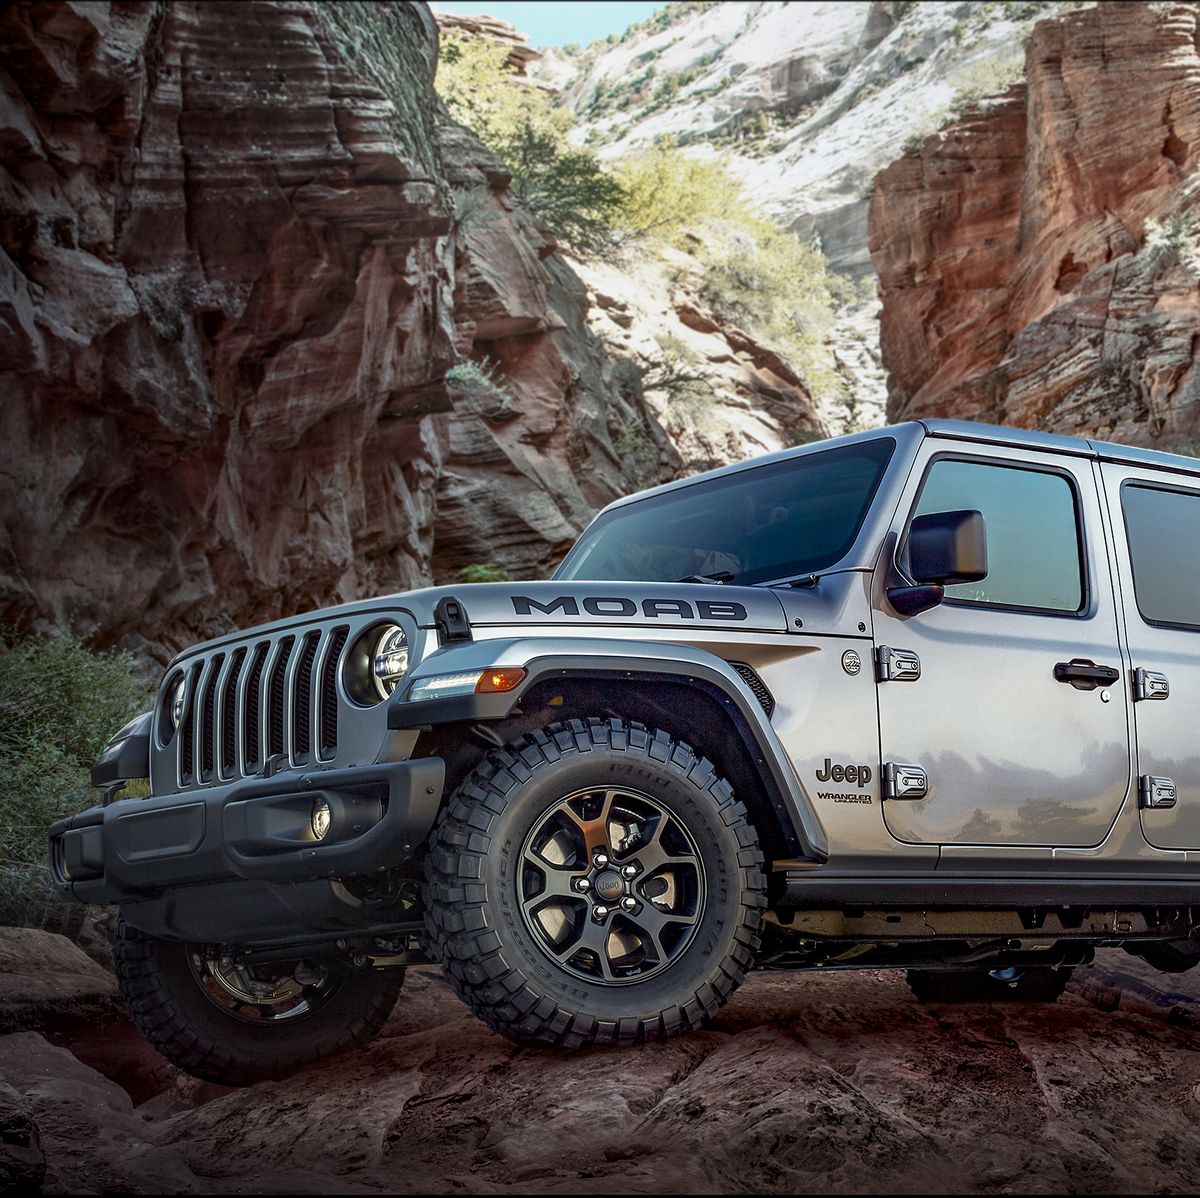 Jeep Says It Has a Fix For Wrangler 